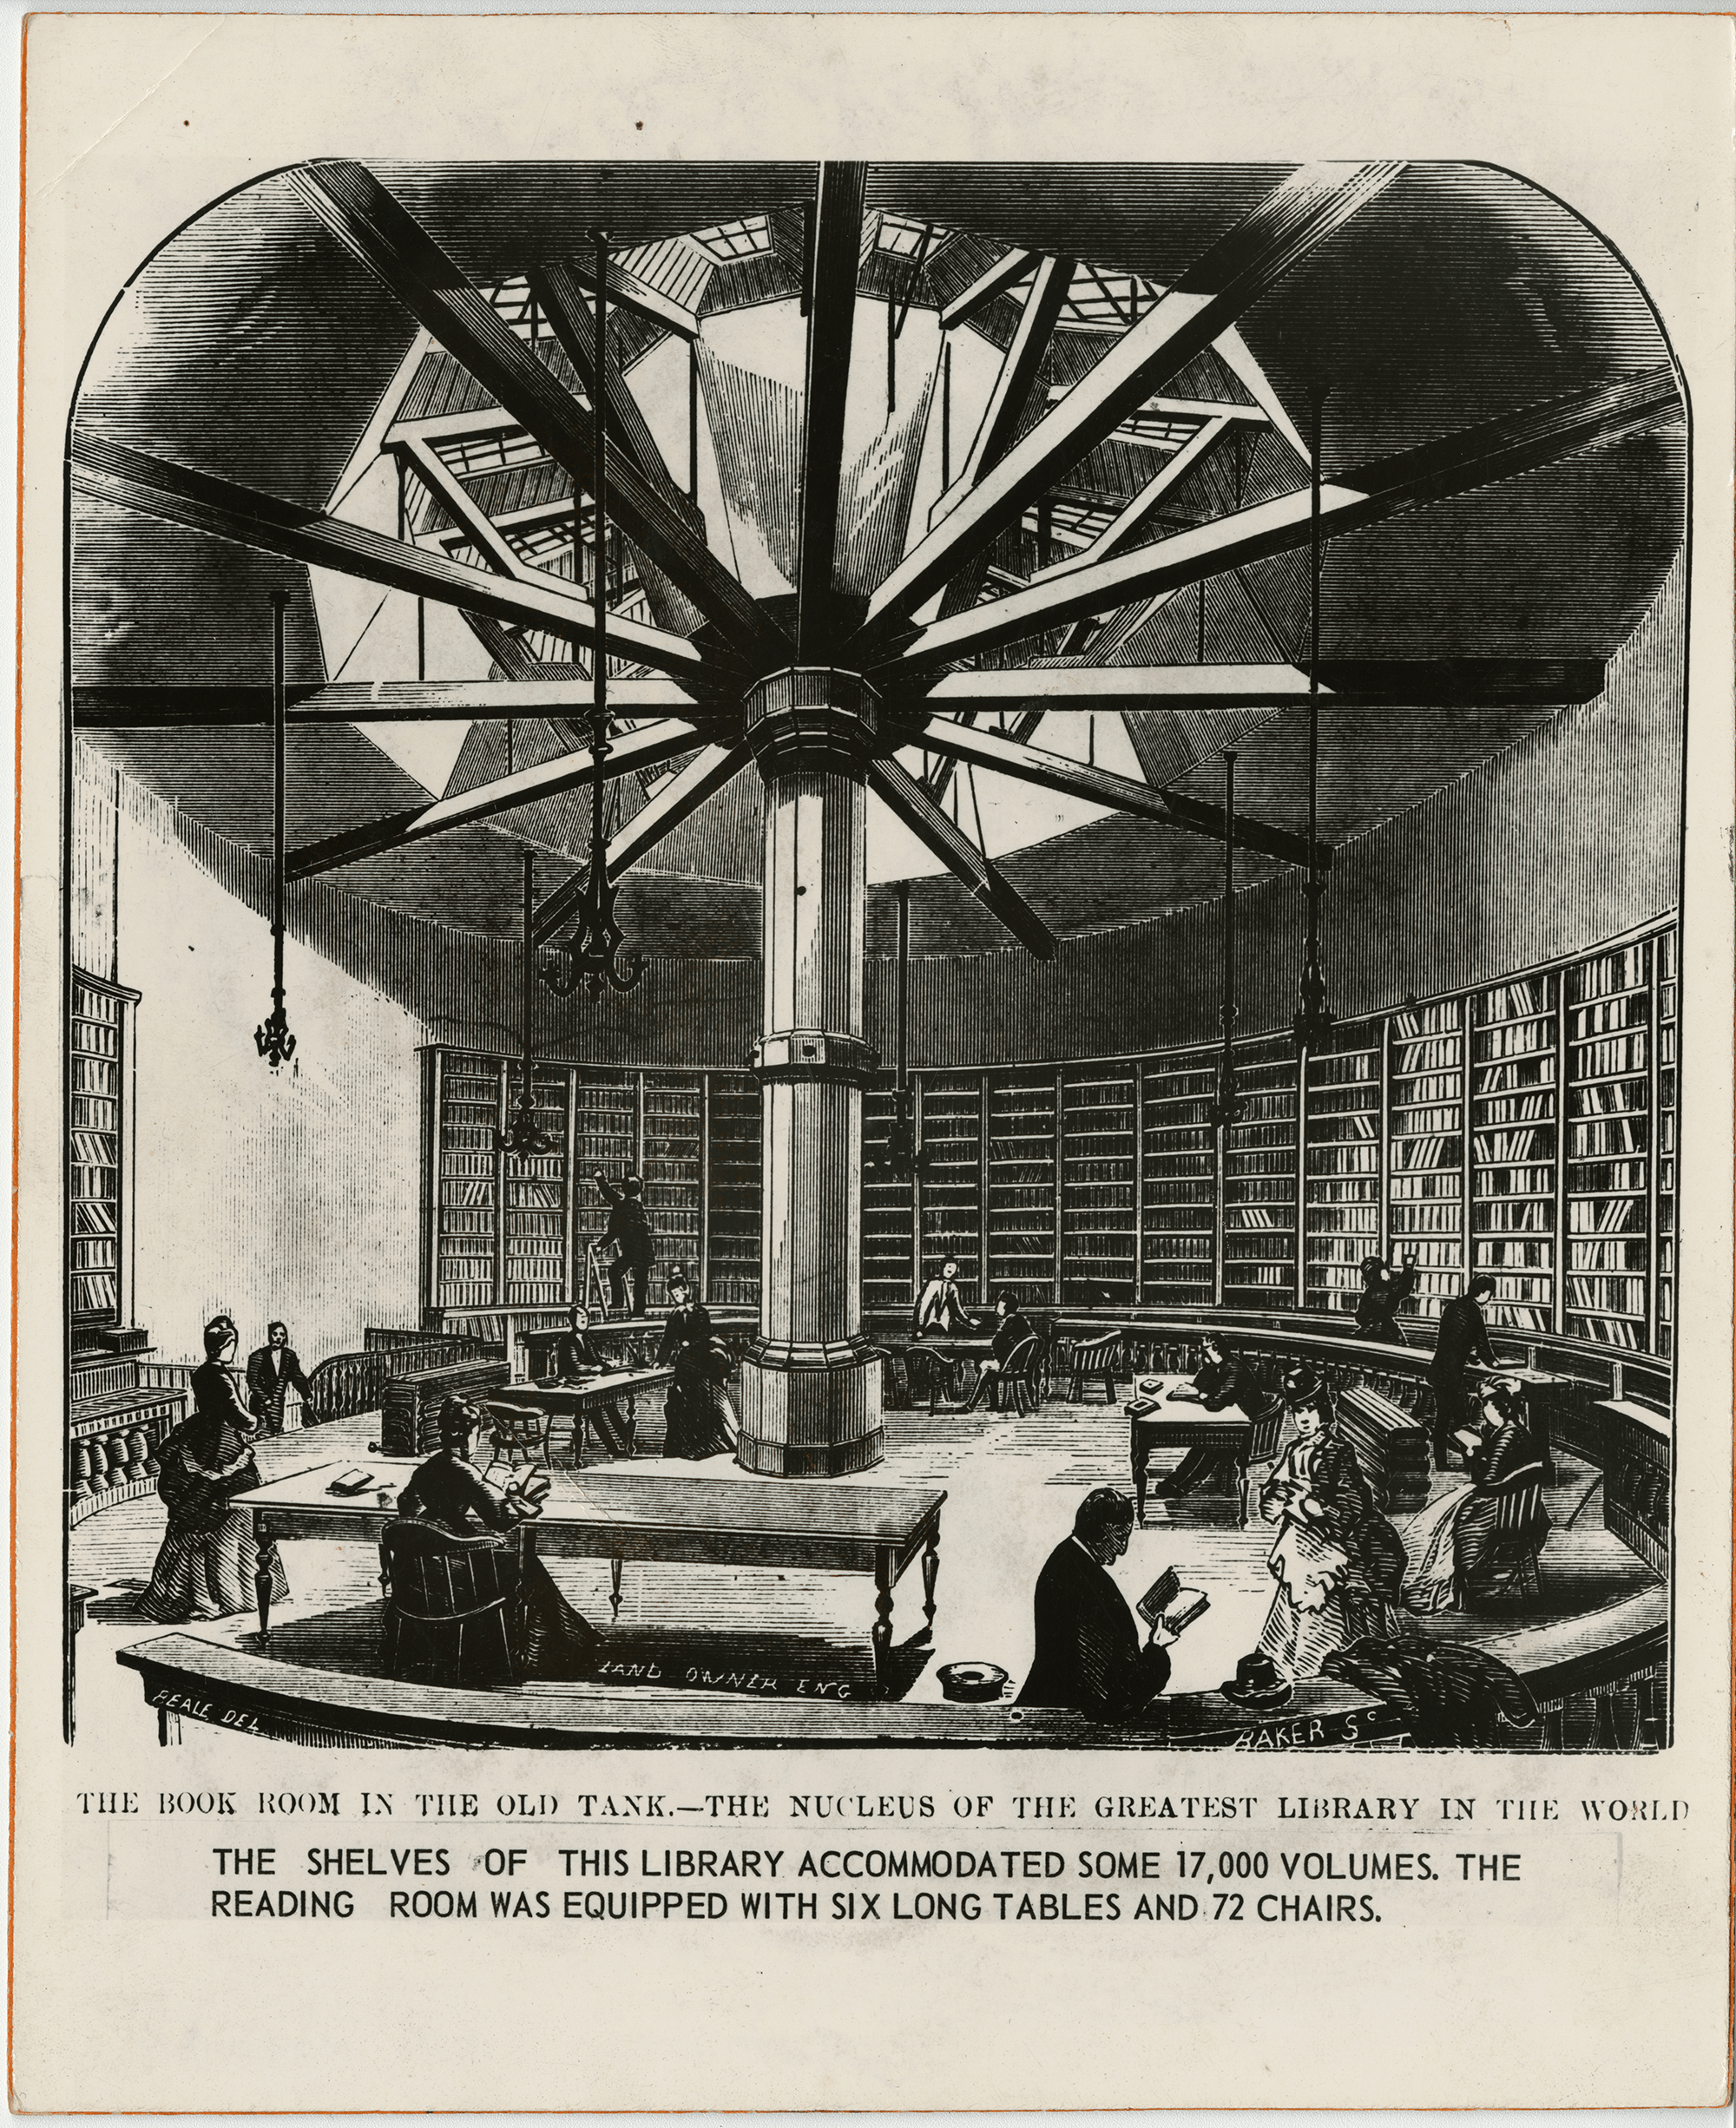 The reading room in the old water tank, 1873. The water tank was one of the only places left to host the library after the Great Fire.